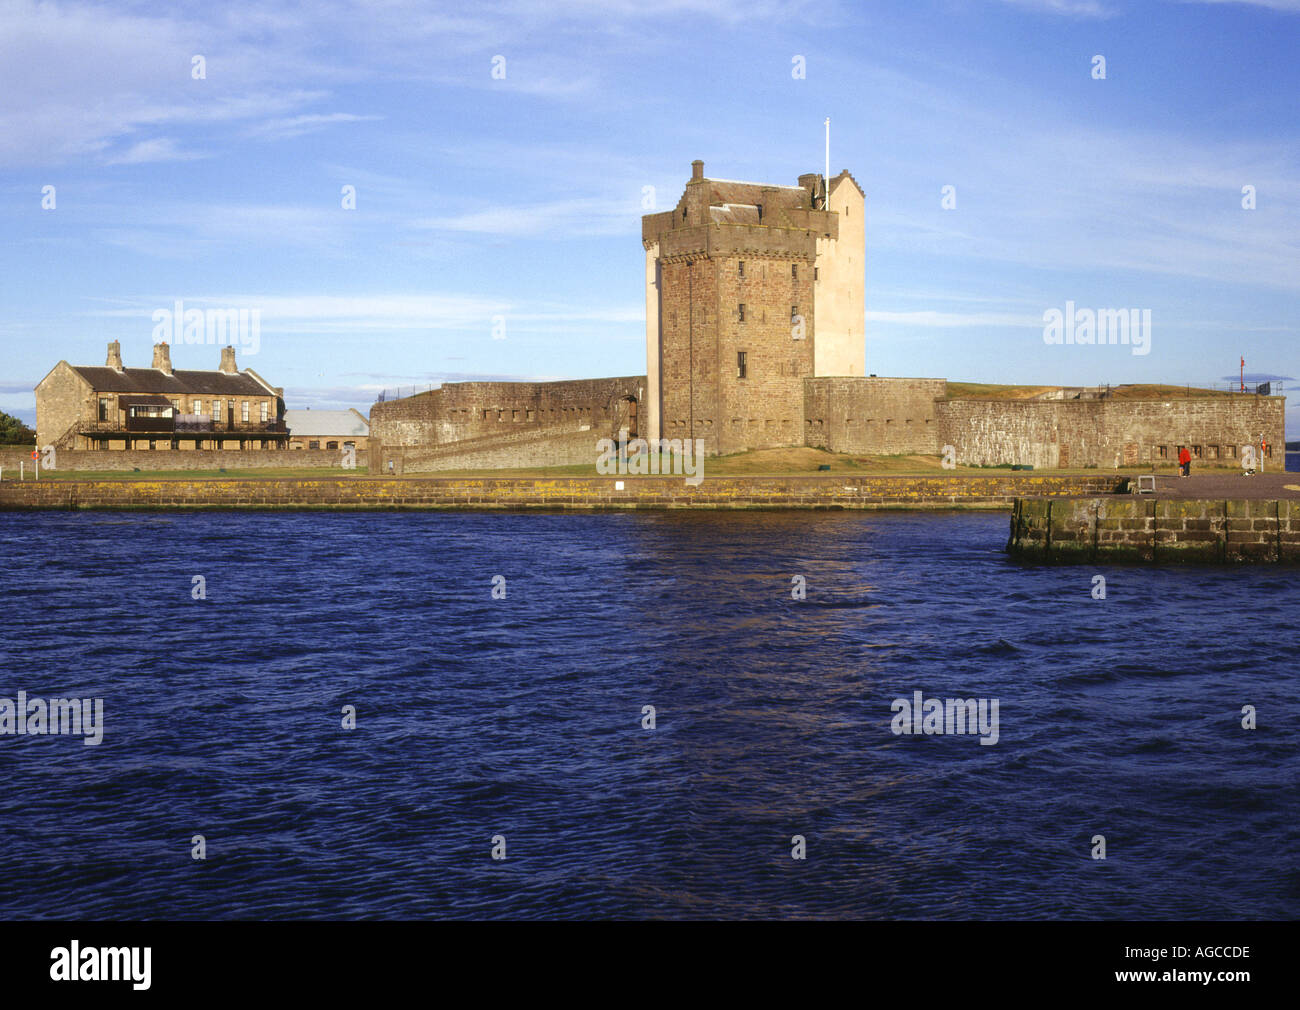 dh Broughty Ferry castle BROUGHTY FERRY ANGUS Scottish Castle barracks and harbour scotland dundee Stock Photo